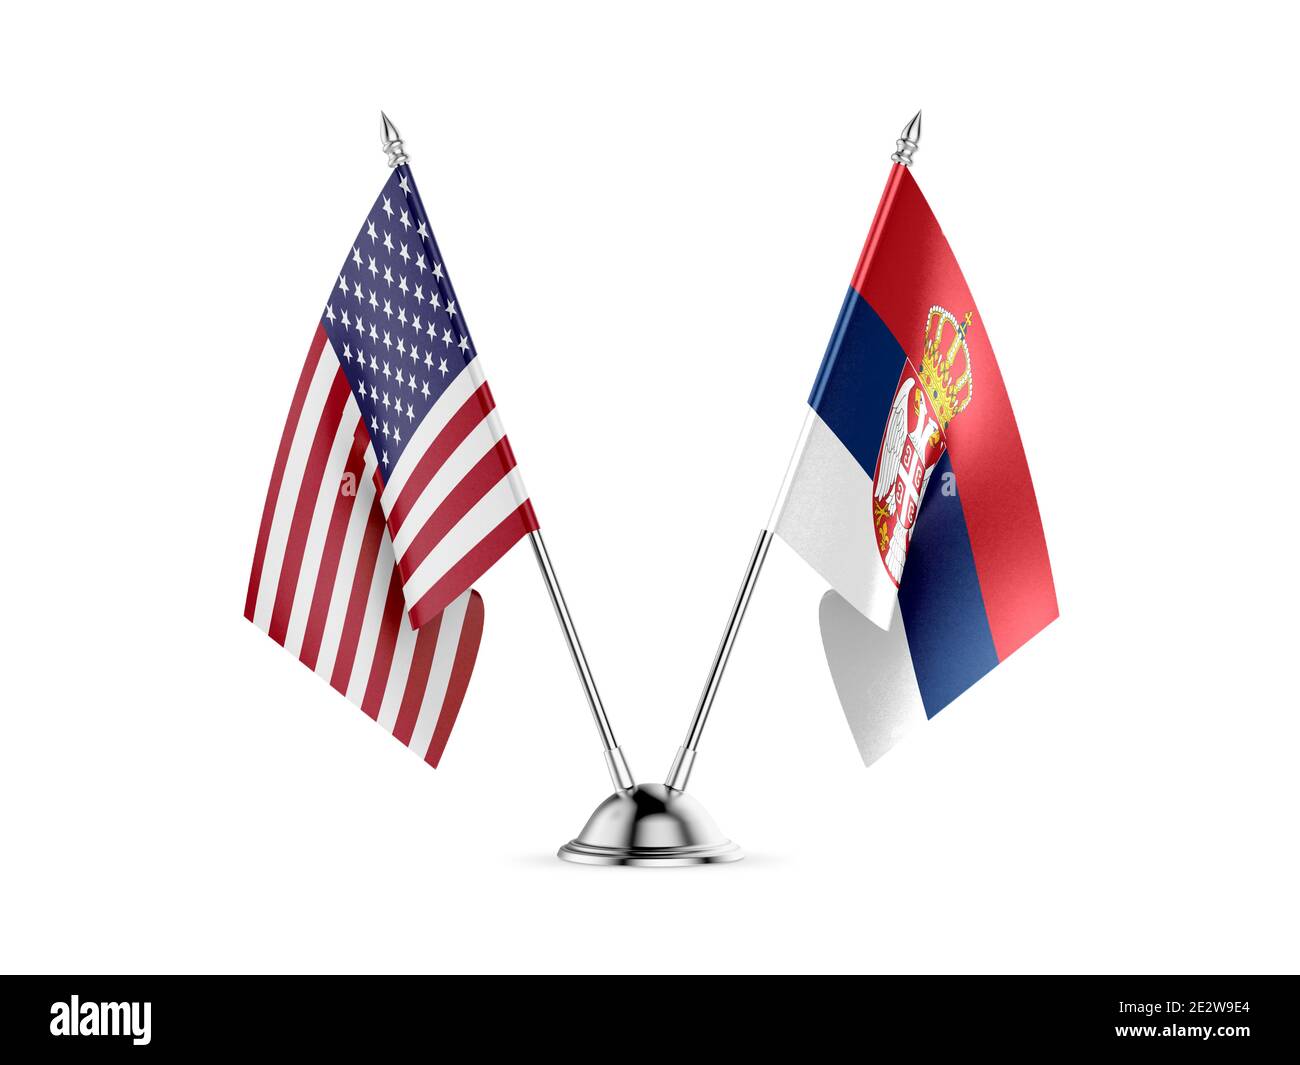 Desk flags, United States  America  and Serbia, isolated on white background. 3d image Stock Photo